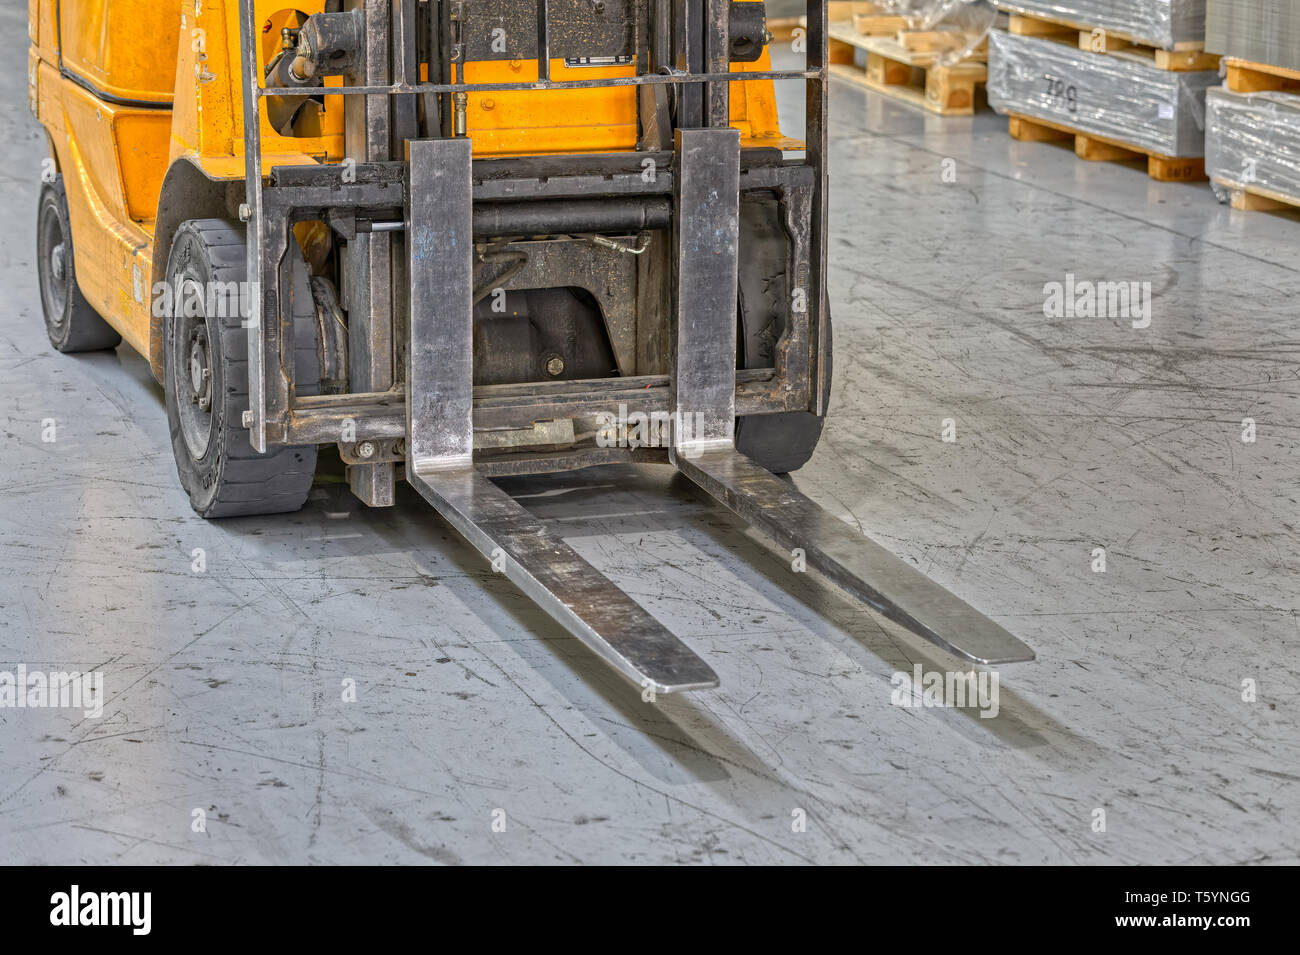 Industrial forklift closeup detail Stock Photo